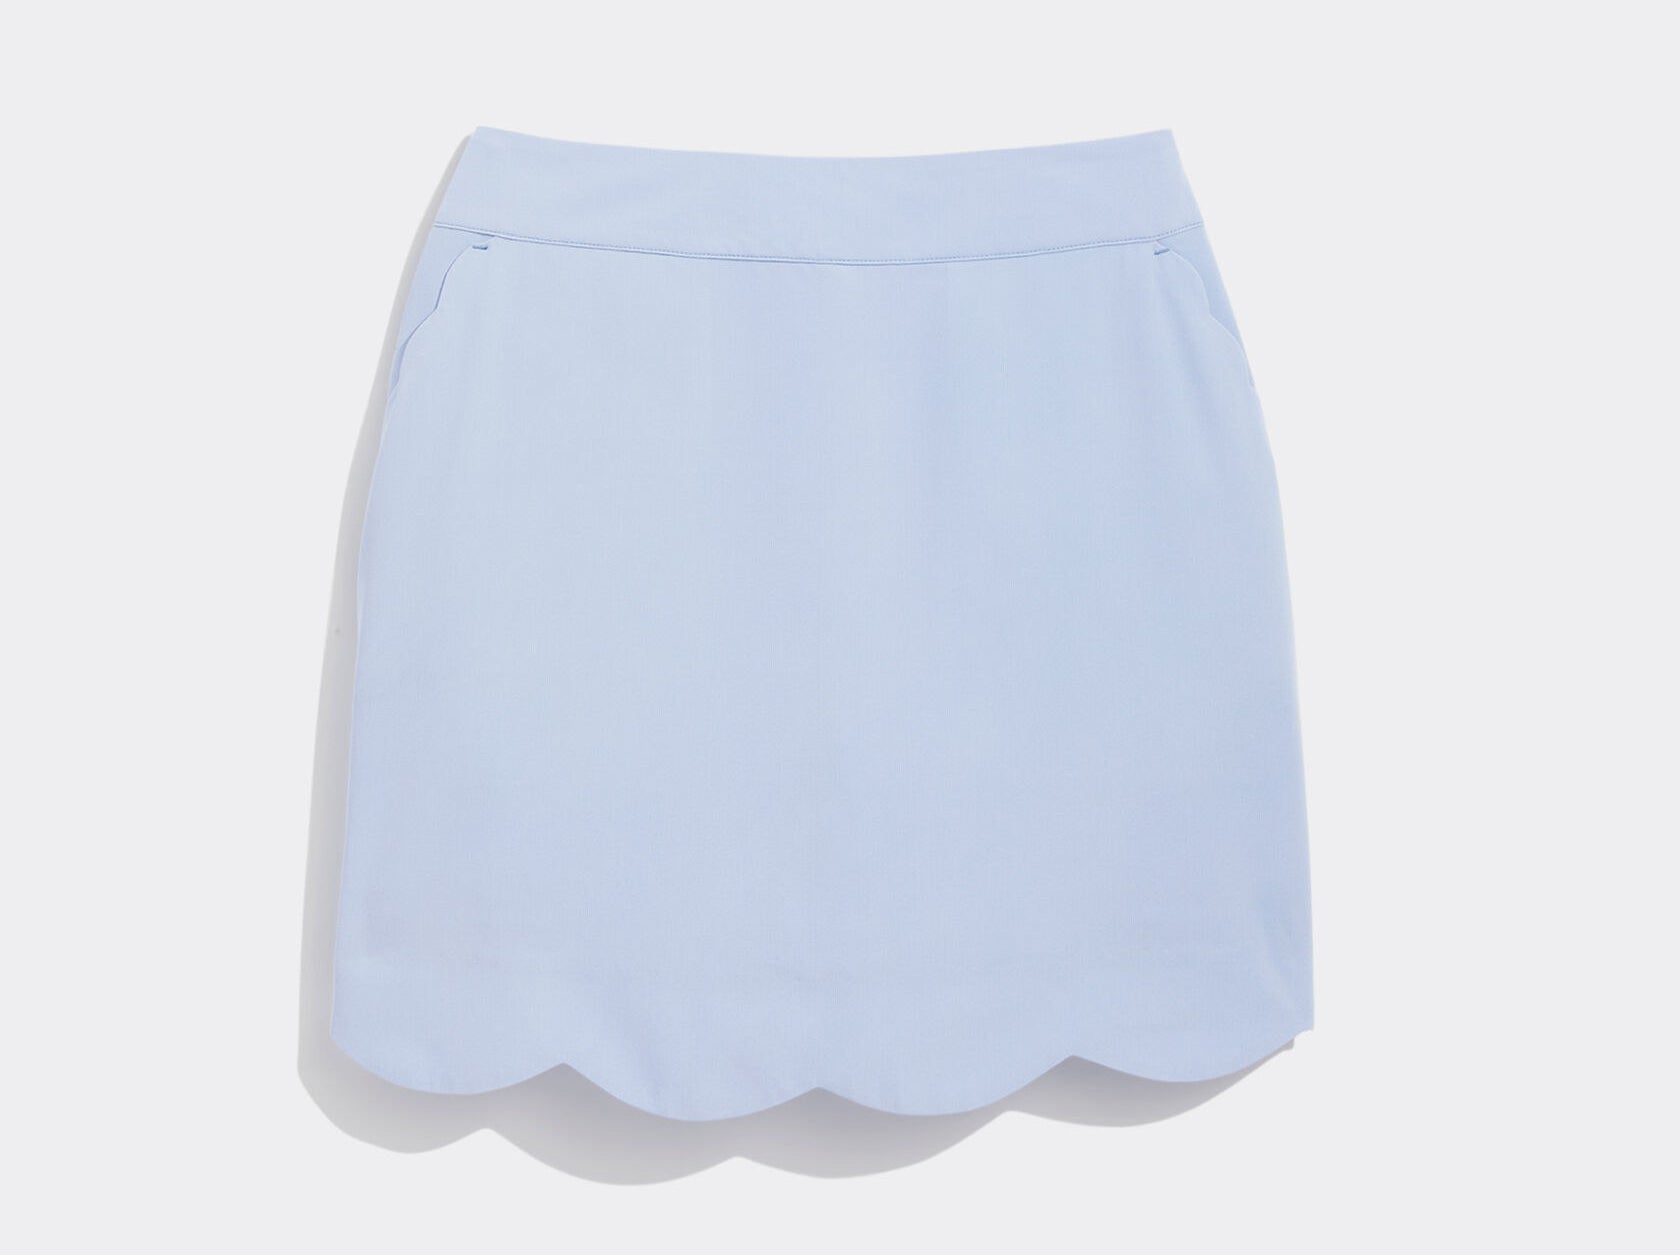 This skort with a scalloped hemline in a light blue color